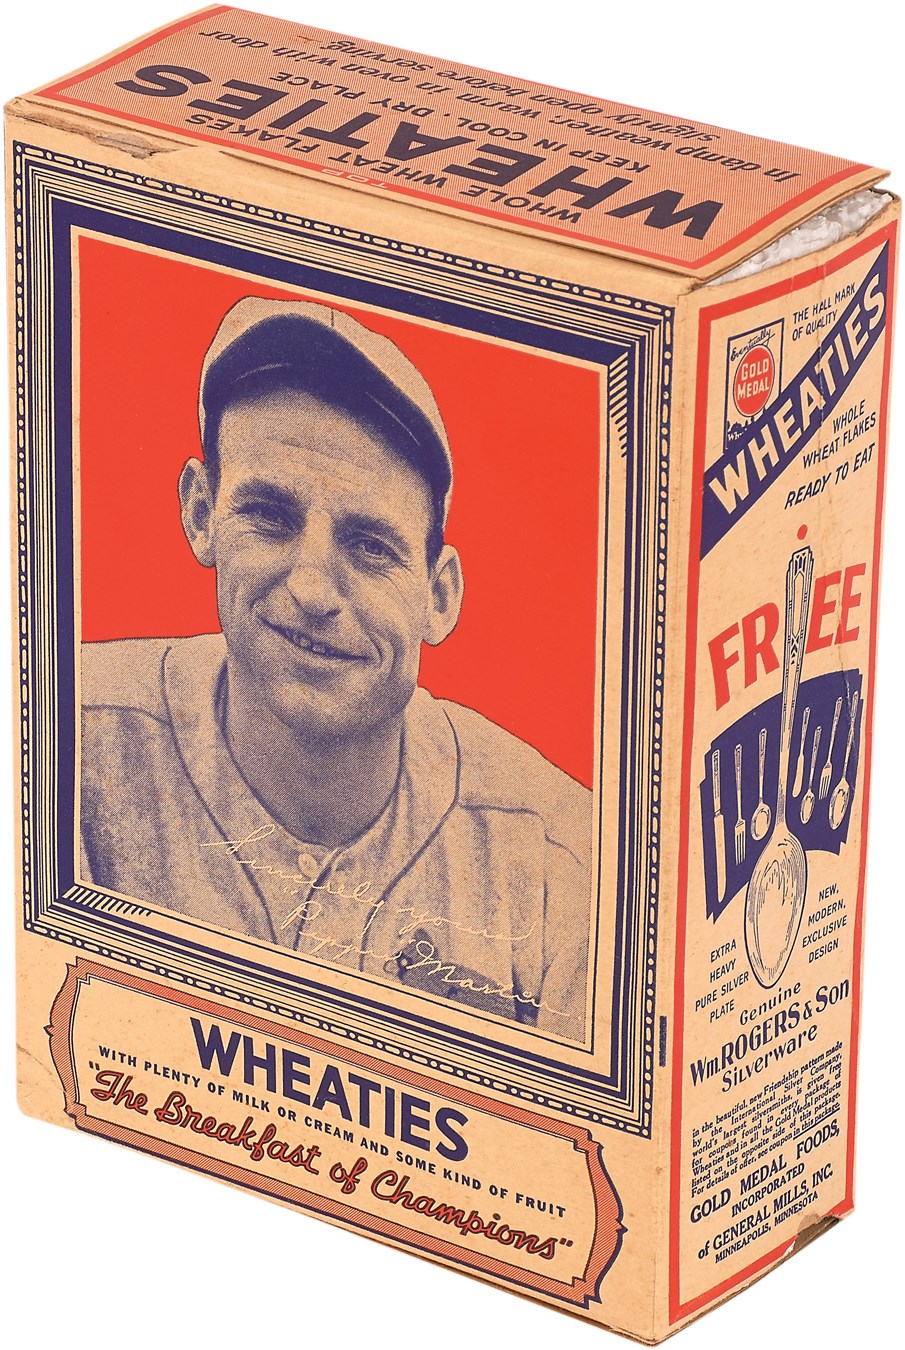 Pepper Martin 1935 Wheaties Series-1 Complete Box - Nicest One!